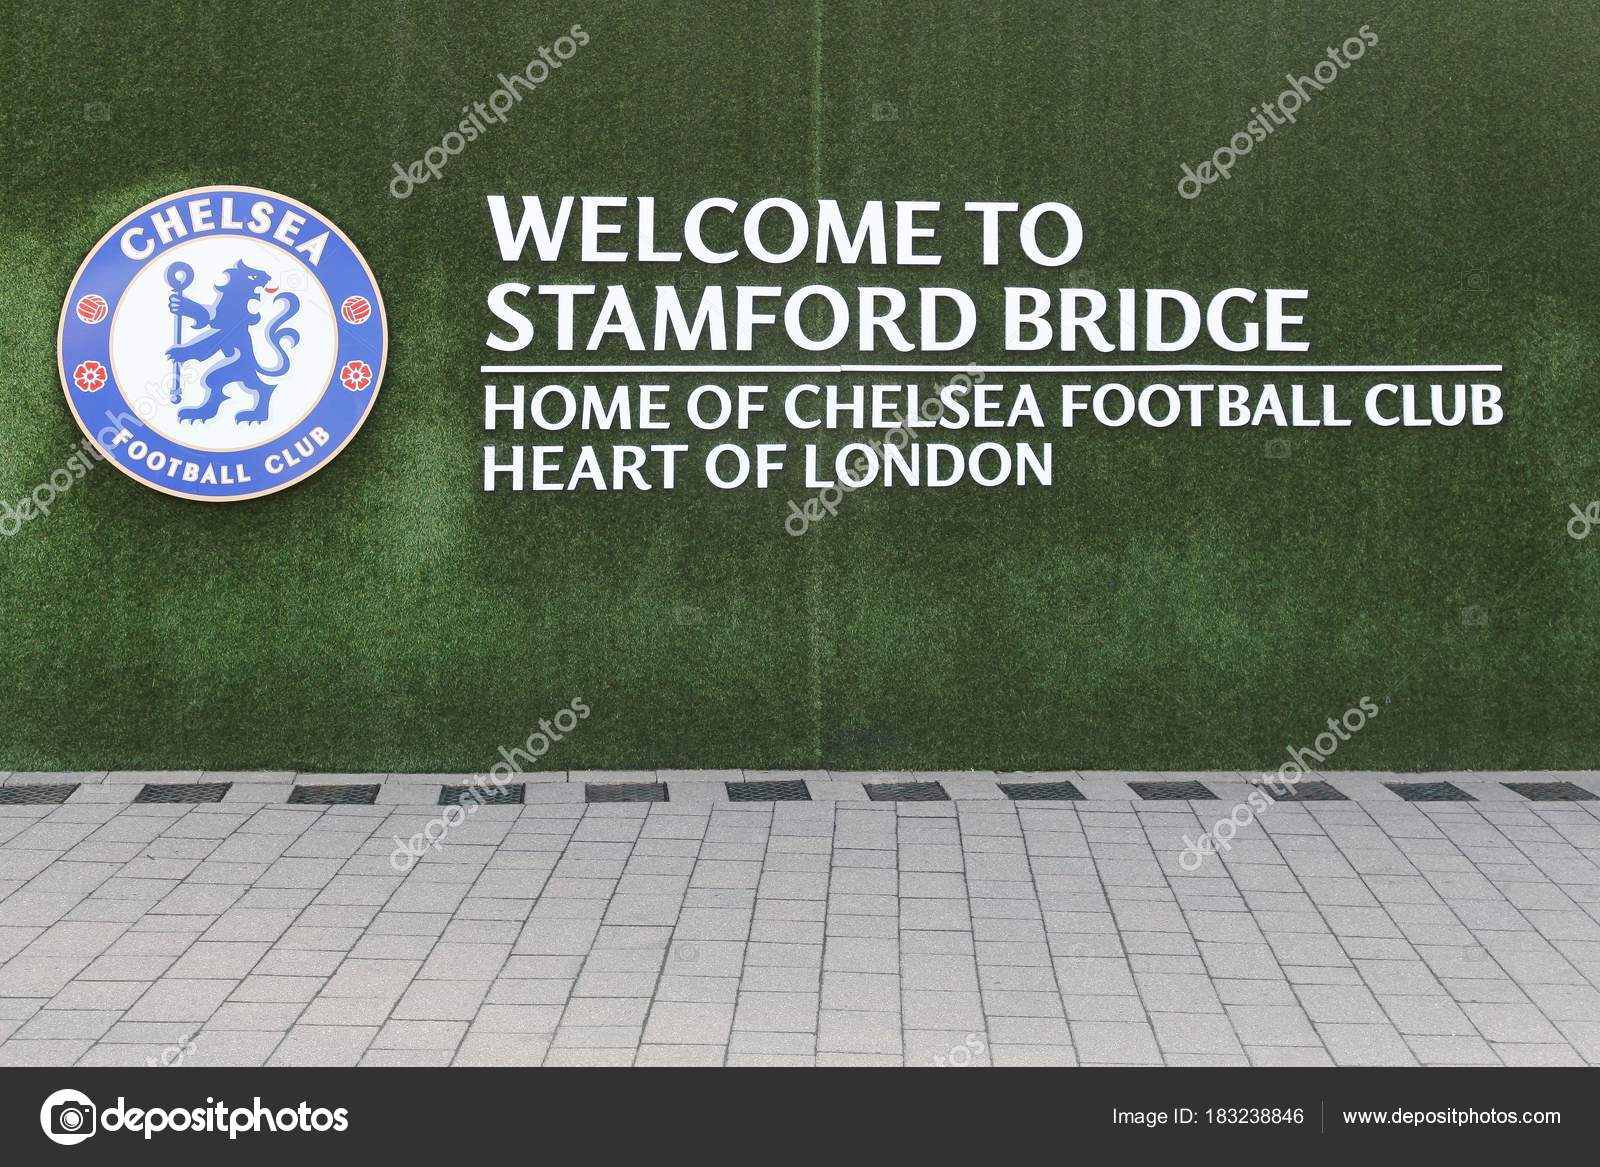 Download Welcome to Chelsea, the heart of London!